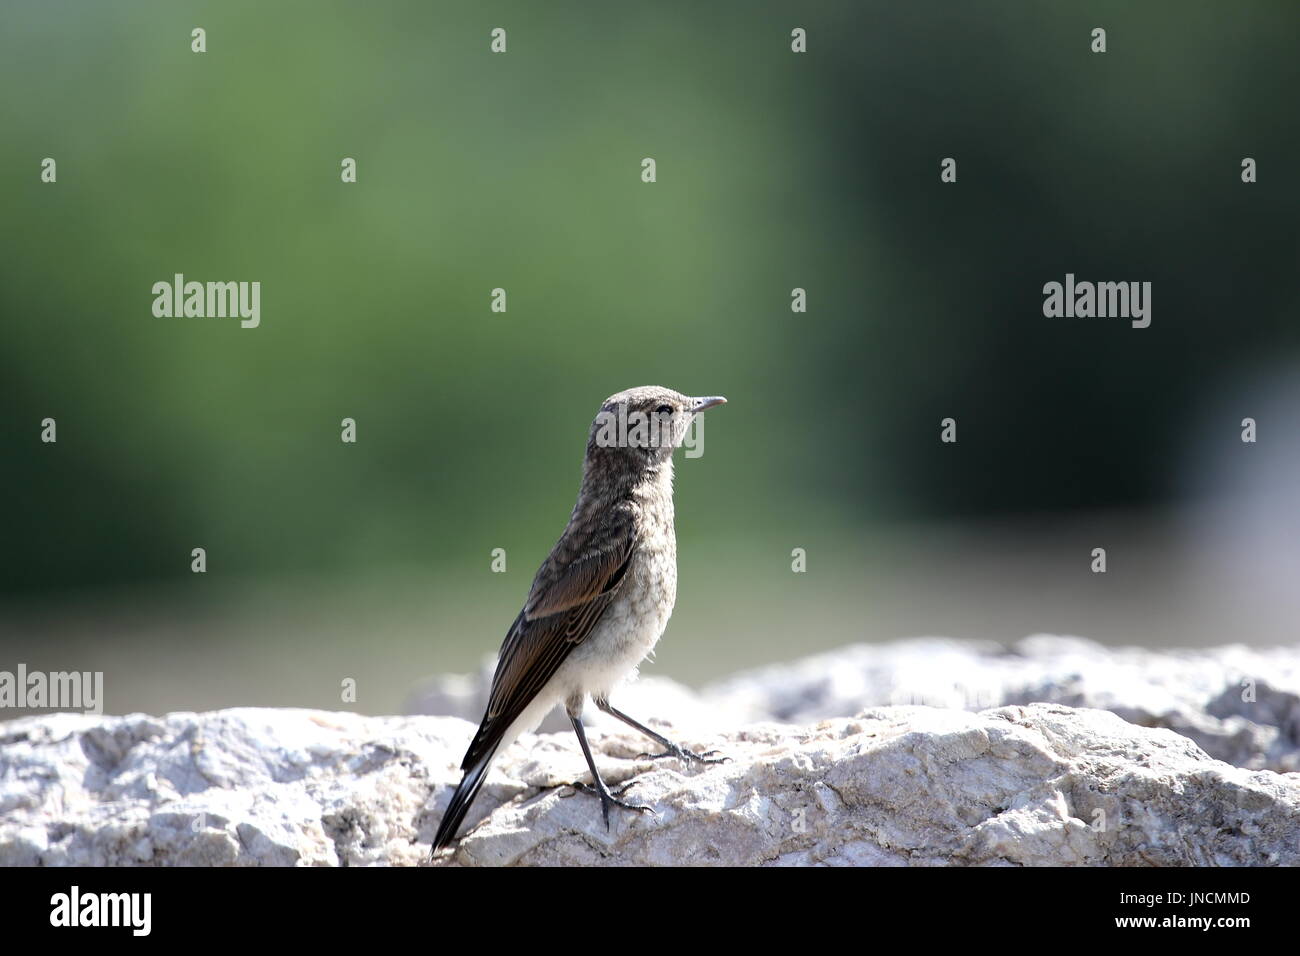 Northern wheatear taken in Tralleis ancient city.. Stock Photo